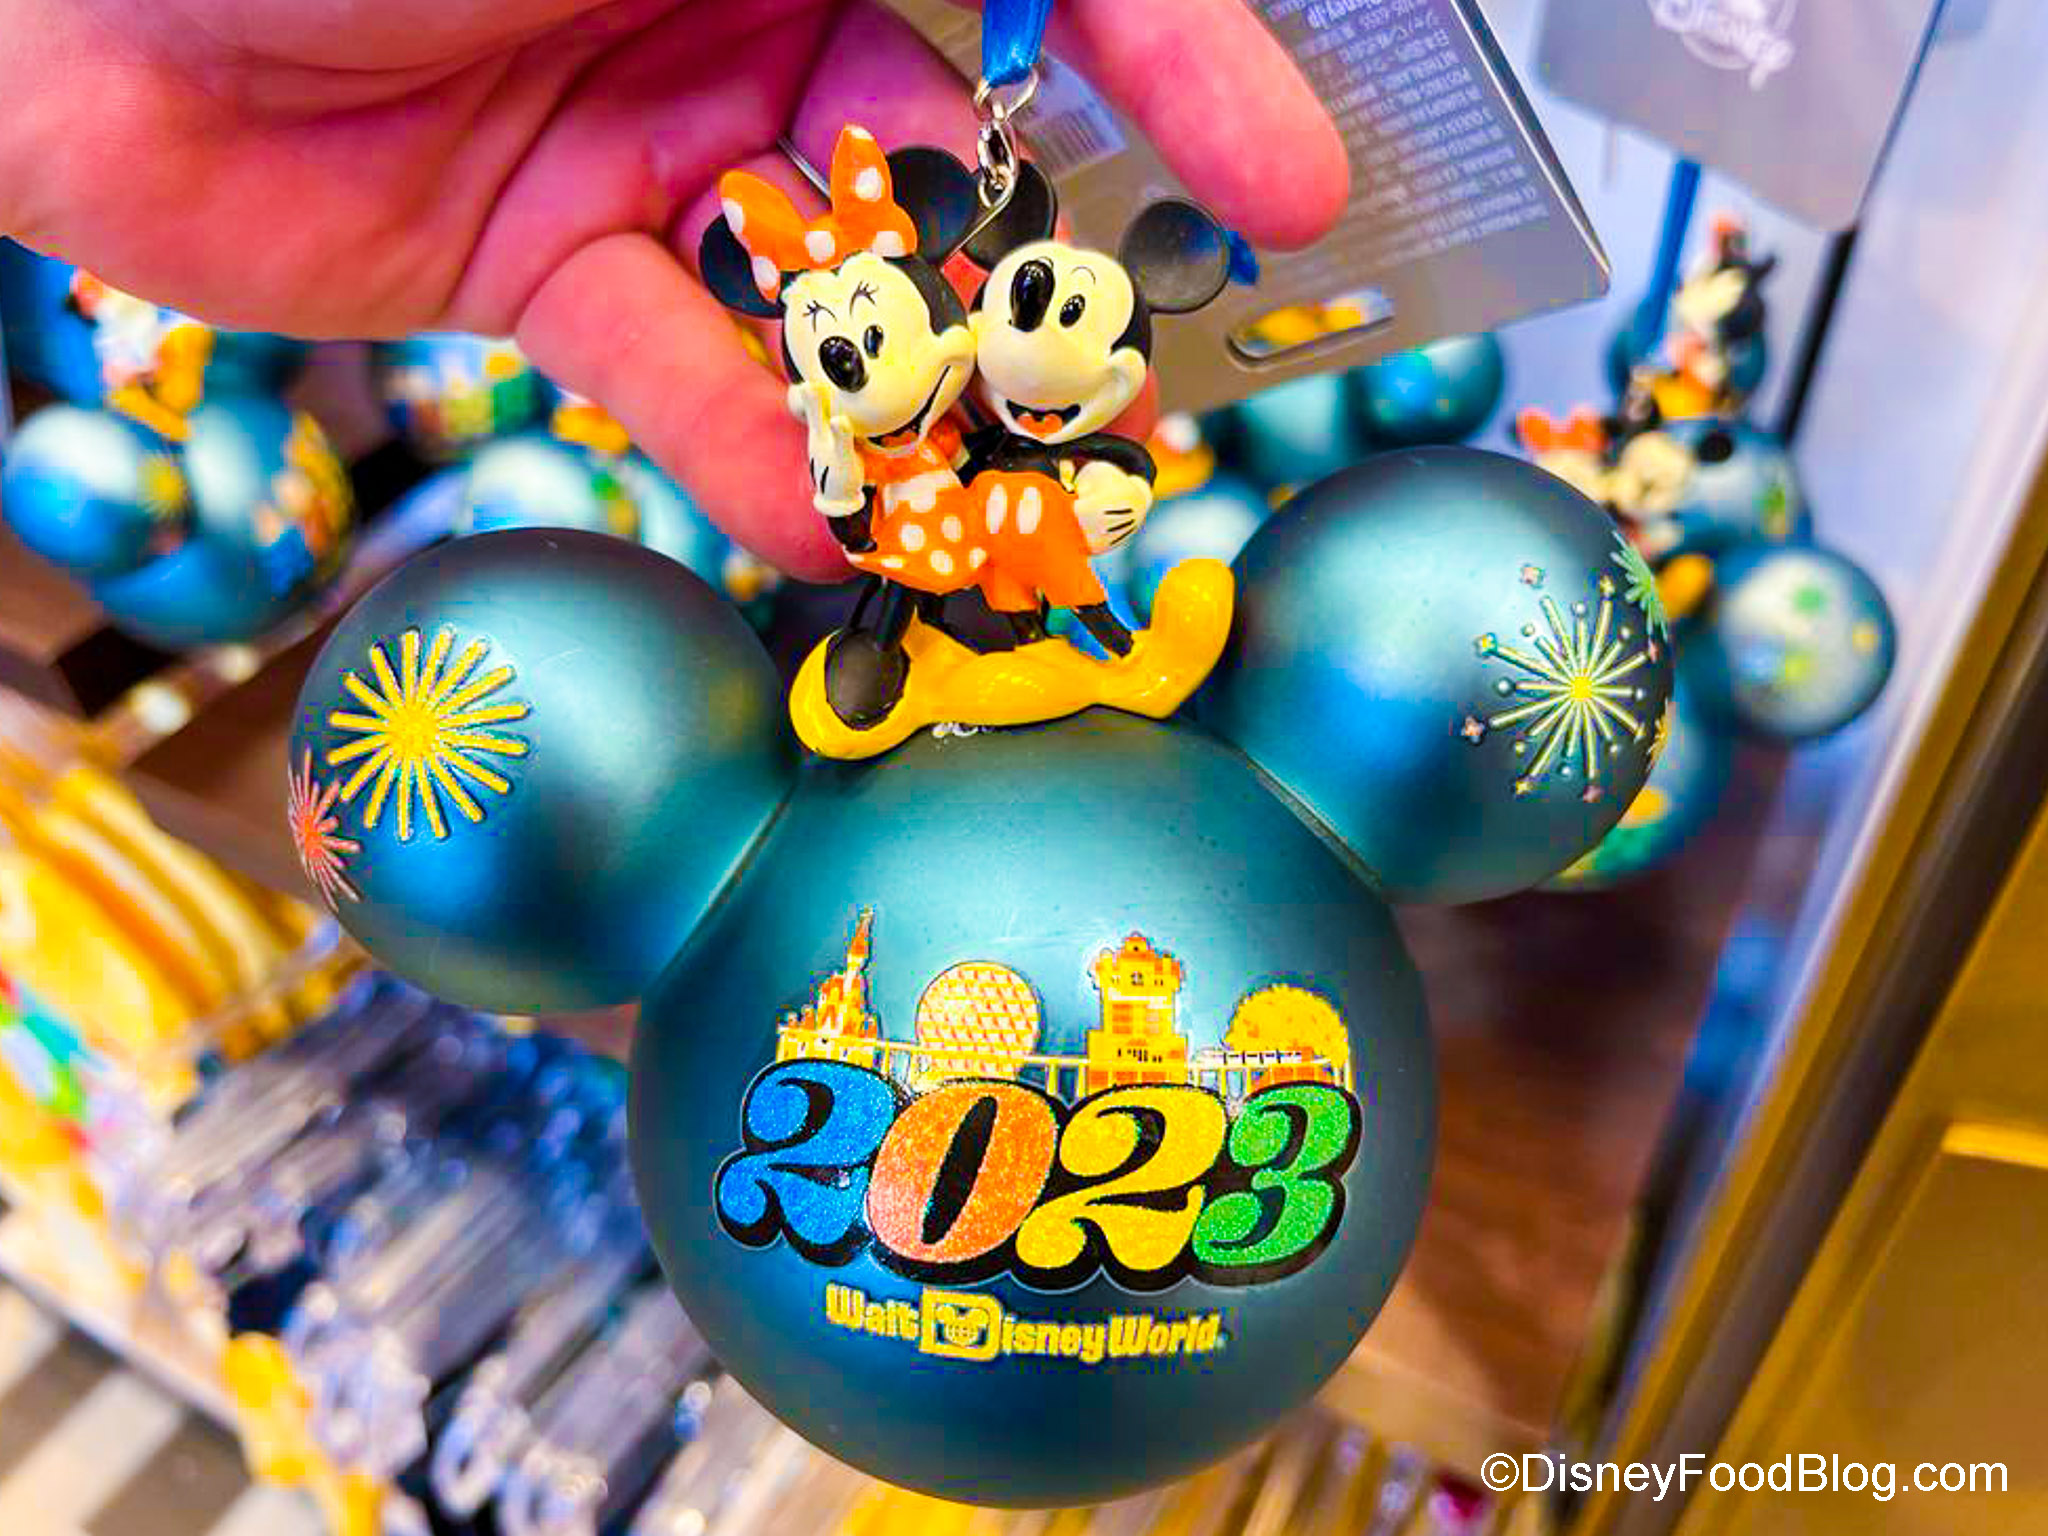 https://www.disneyfoodblog.com/wp-content/uploads/2022/12/2022-wdw-dhs-mickeys-of-hollywood-2023-mickey-ears-ornament-2.jpg